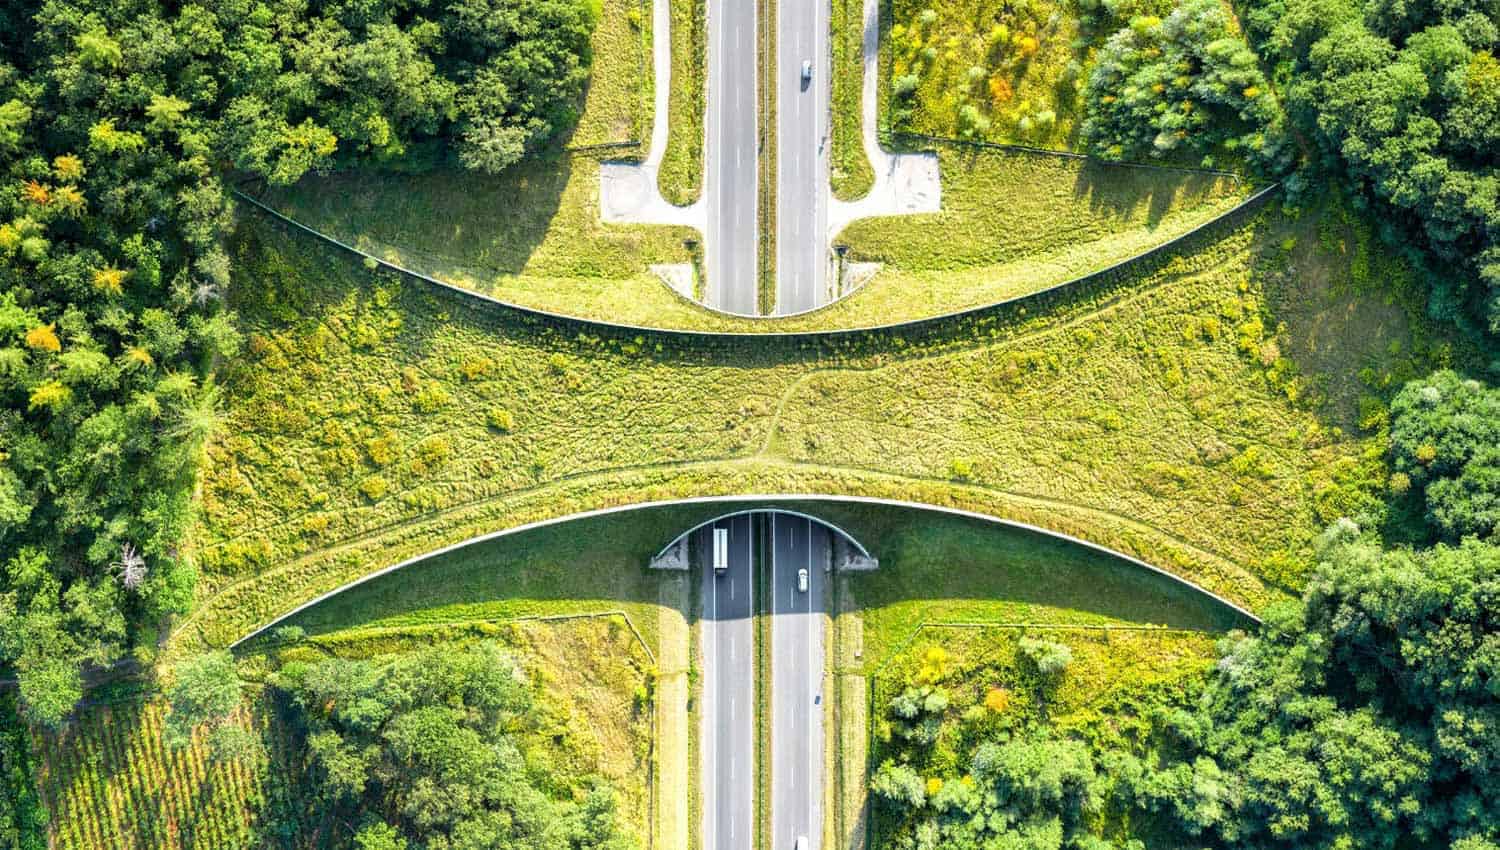 Aerial view of a wildlife crossing over a highway, surrounded by greenery.